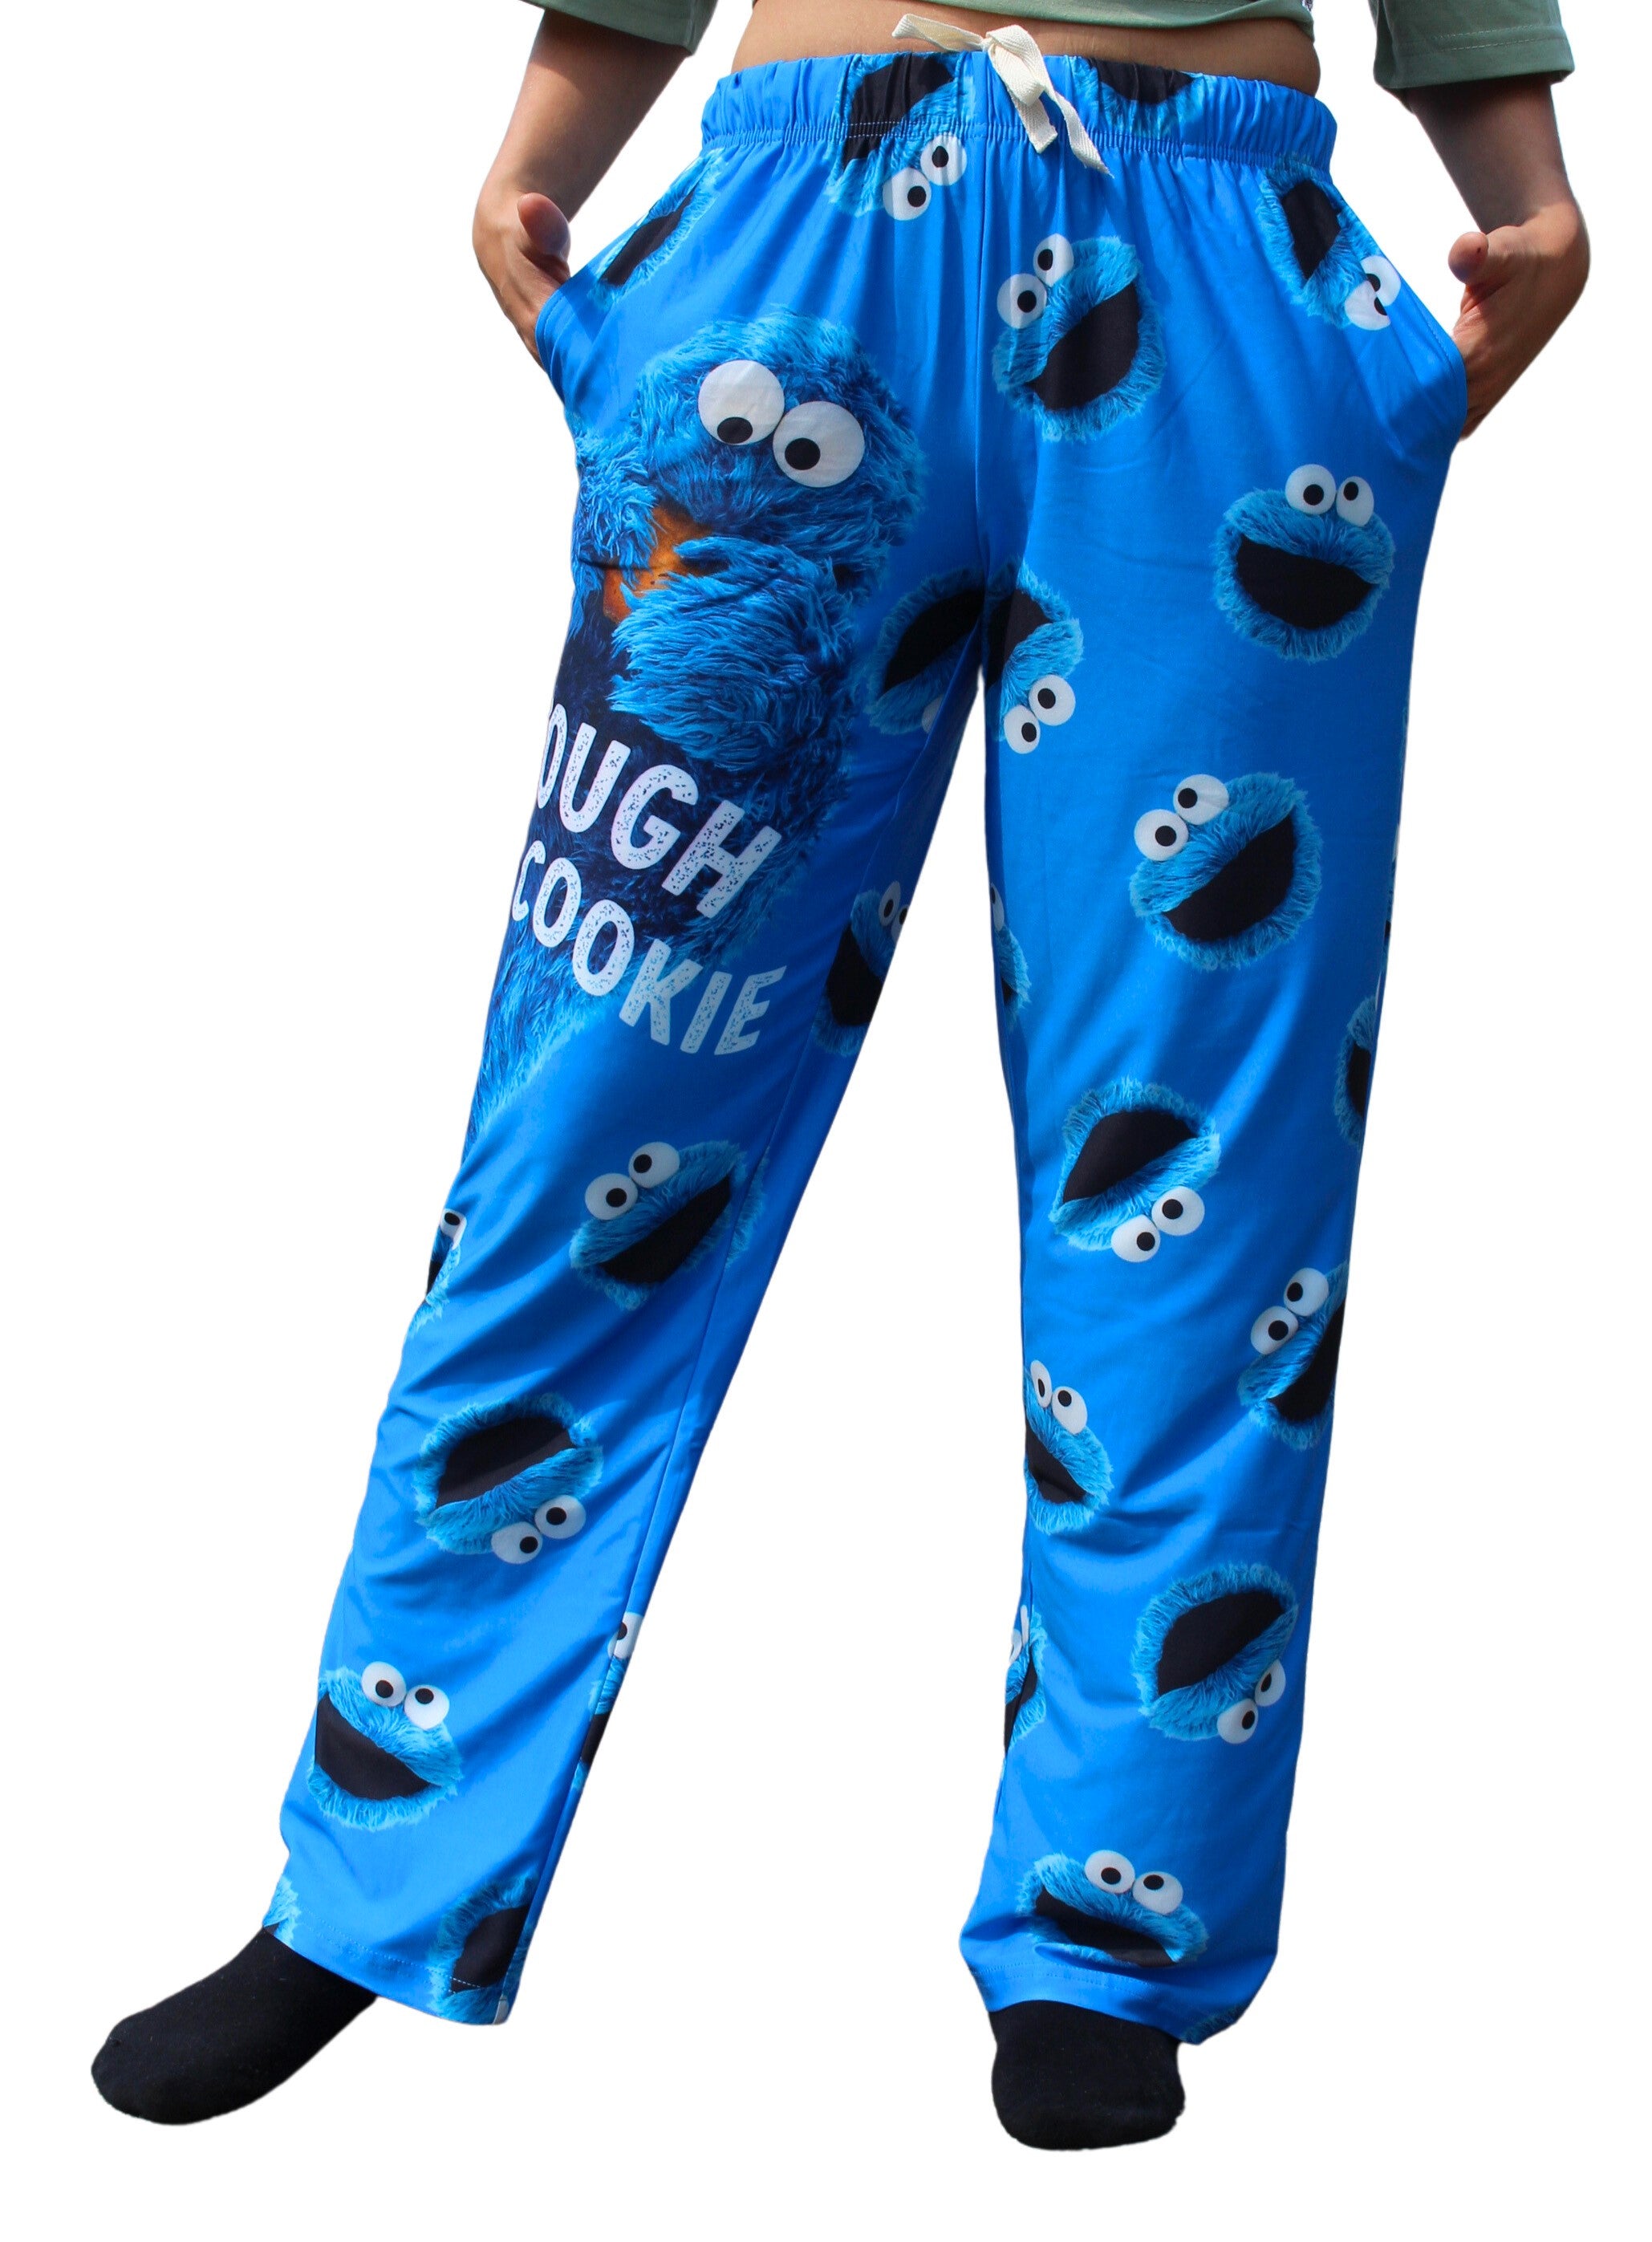 Tough Cookie Pajama Lounge Pants on model front view (waist down)